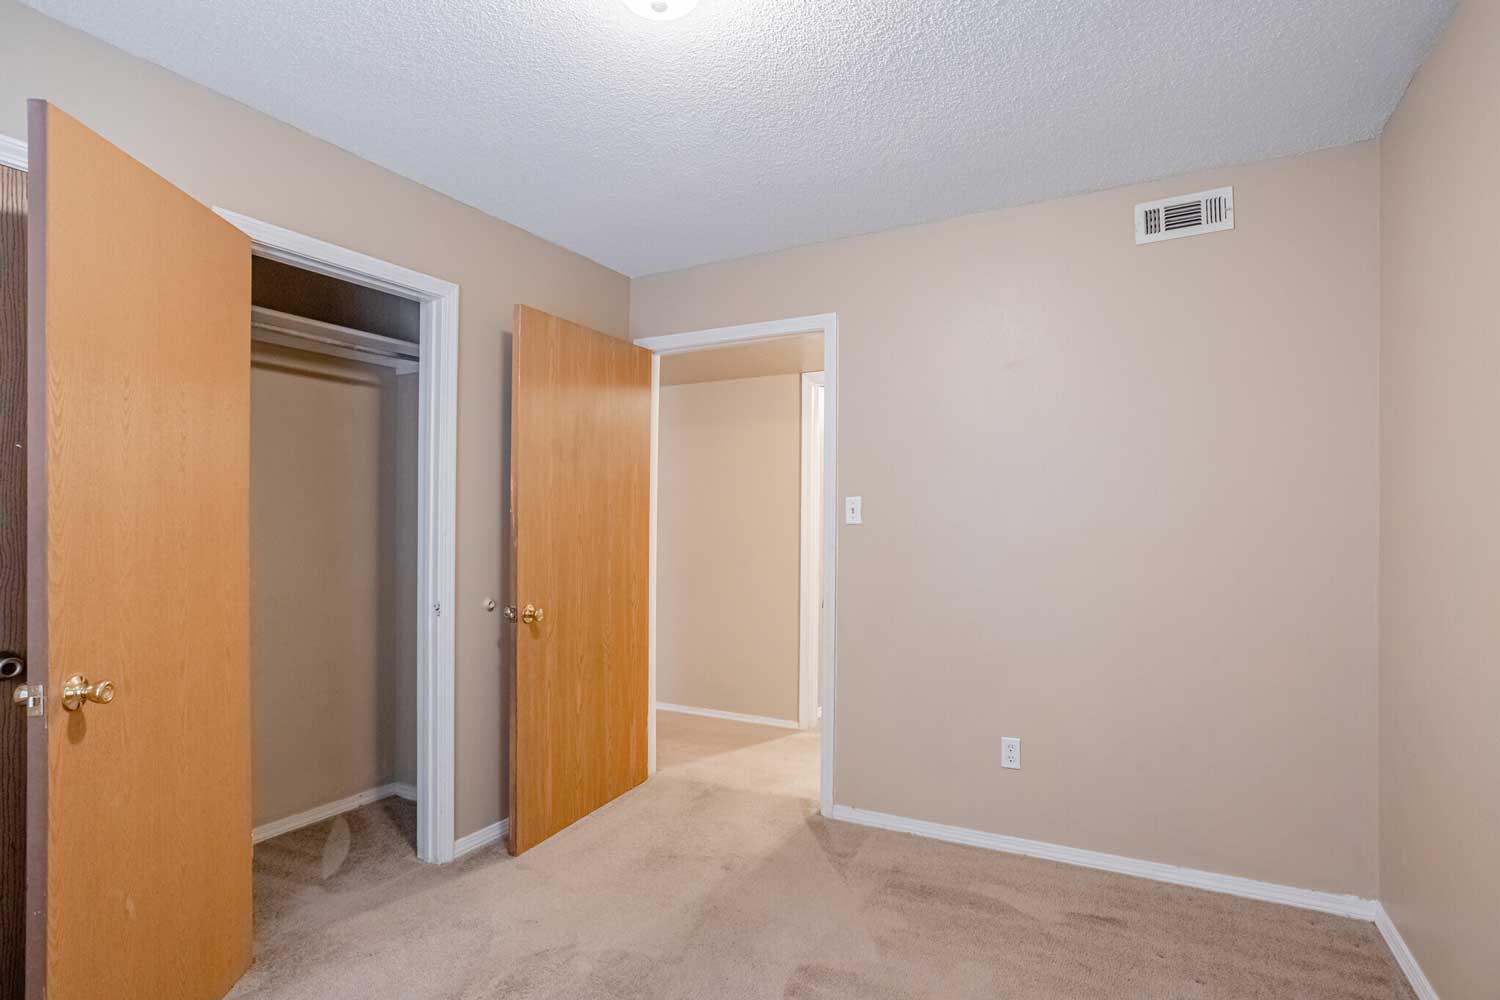 Large Closet Spaces at Crown Ridge Apartments in Fayetteville, Arkansas